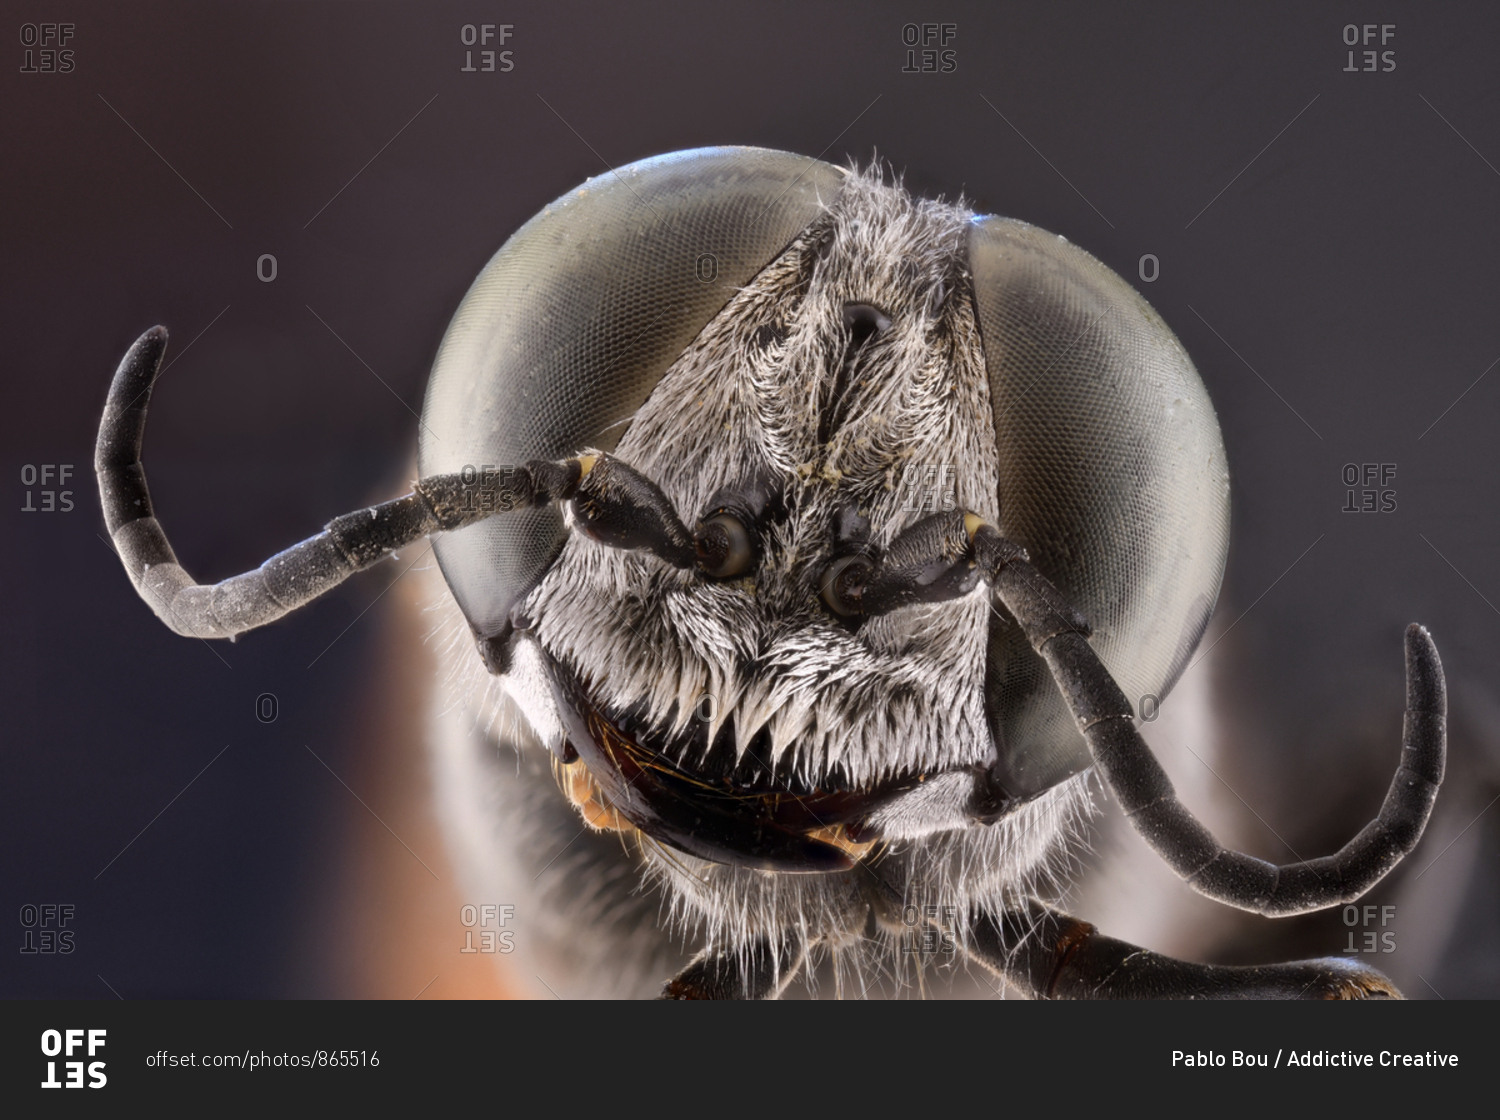 Closeup of magnified grey head of flying insect with round convex green eyes